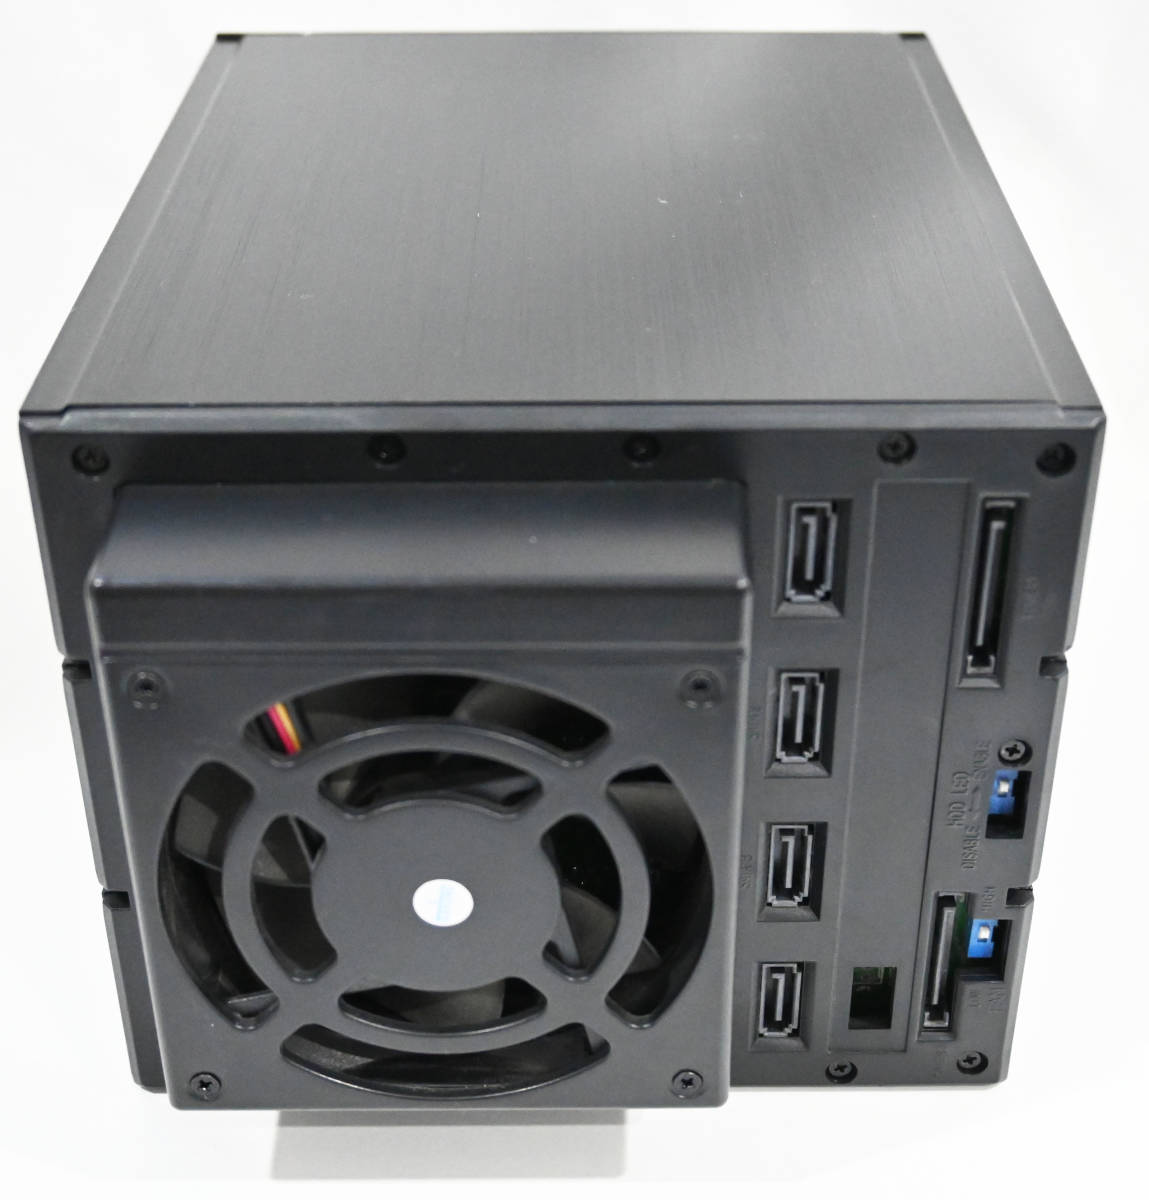 BPN-DE340SS-BK 5インチベイ3段 3.5インチHDD 4台マウントアダプタ + Western Digital RED WD60EFRX  6TB HDD 4台セット product details | Yahoo! Auctions Japan proxy bidding and  shopping service | FROM JAPAN